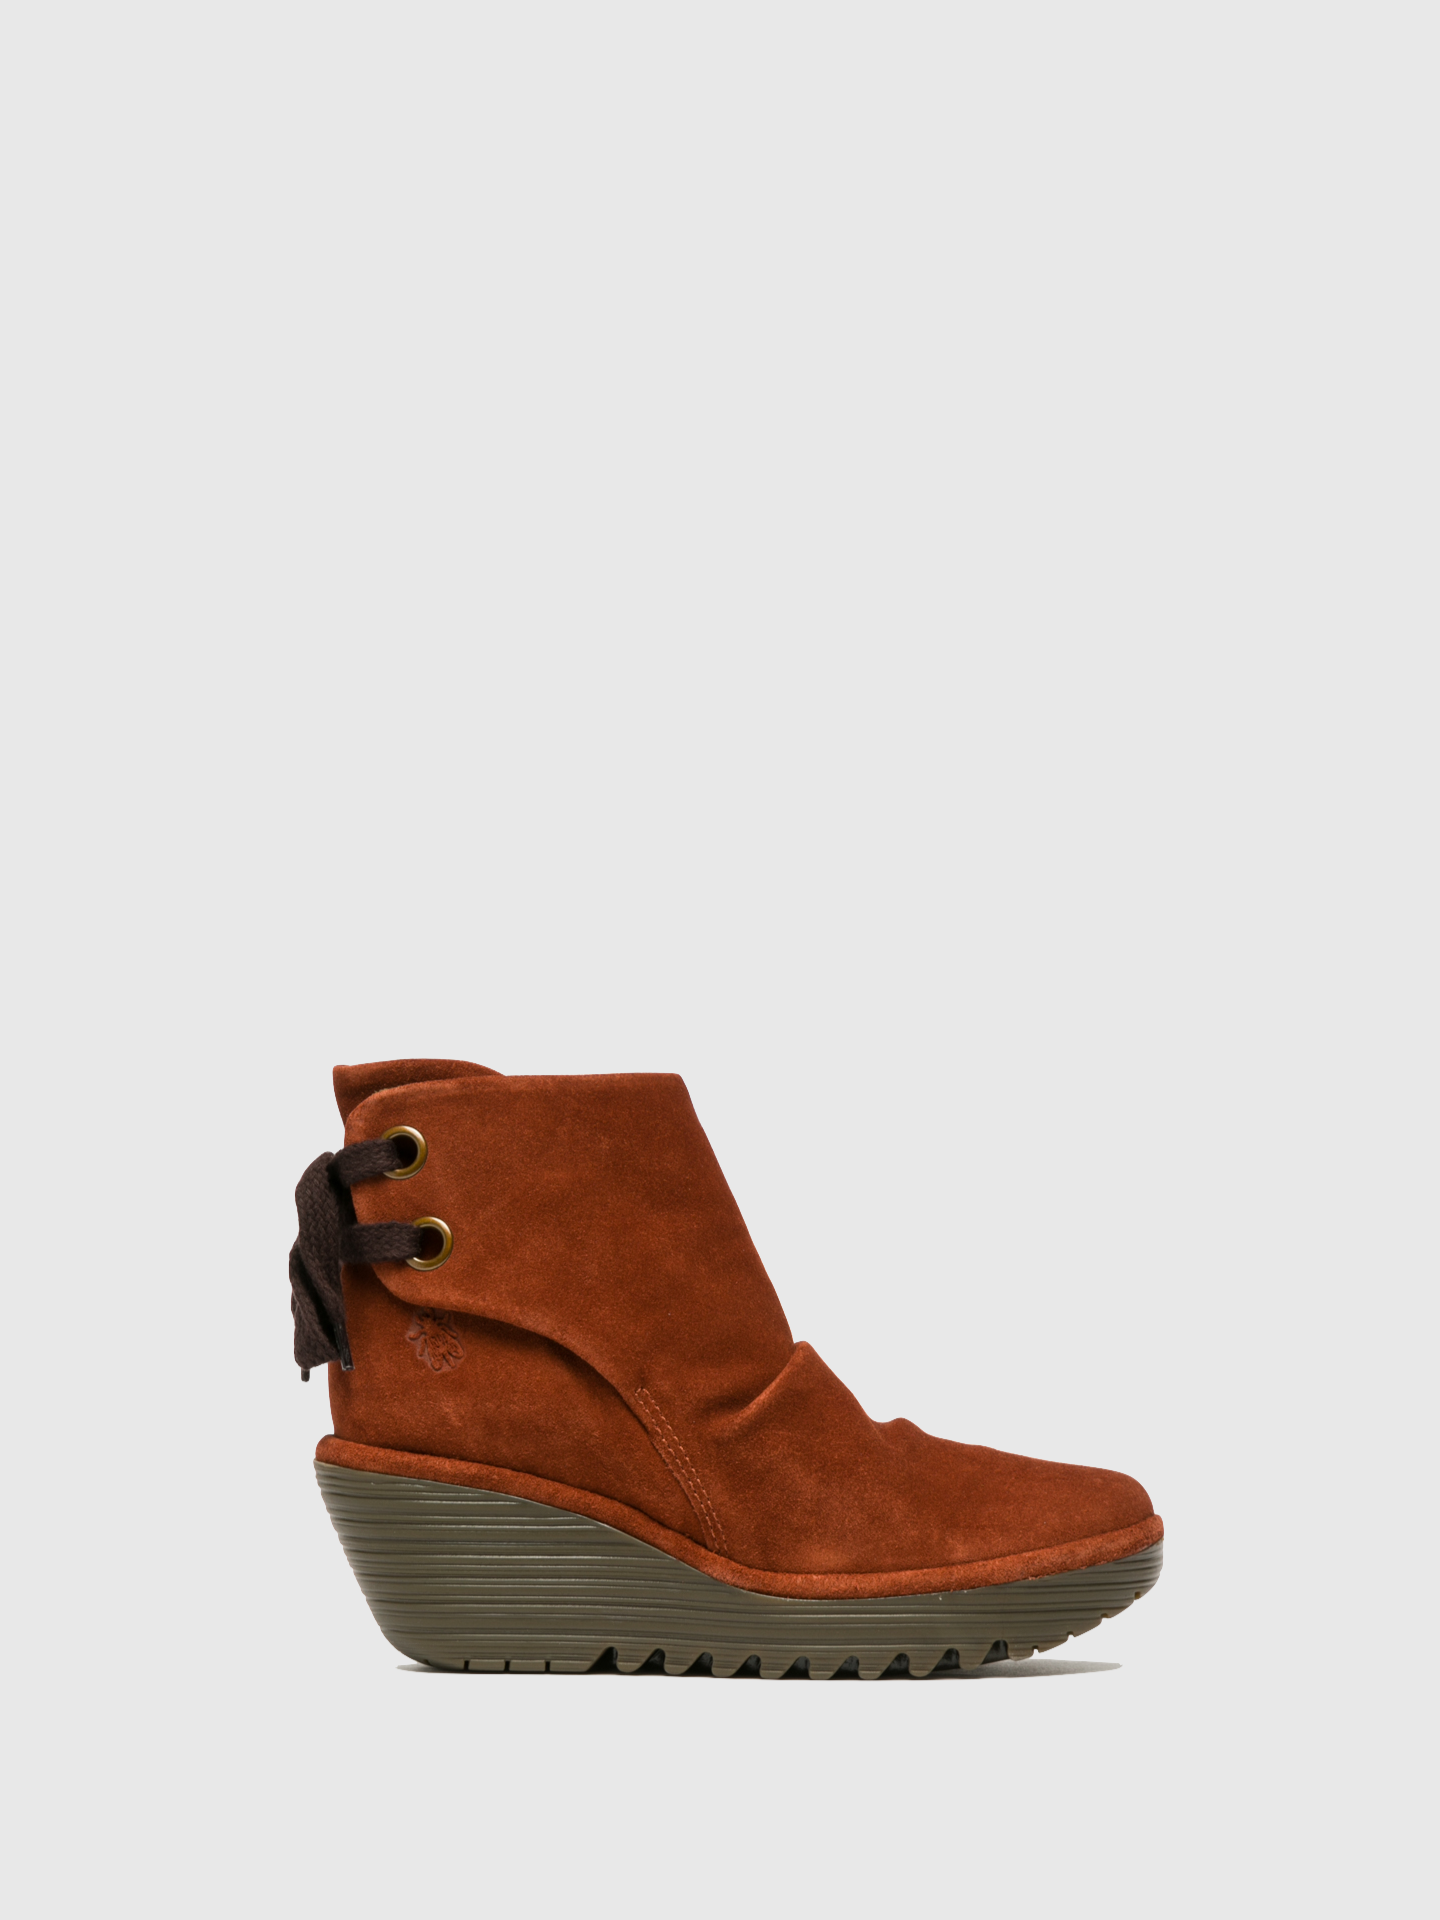 Fly London Firebrick Wedge Ankle Boots